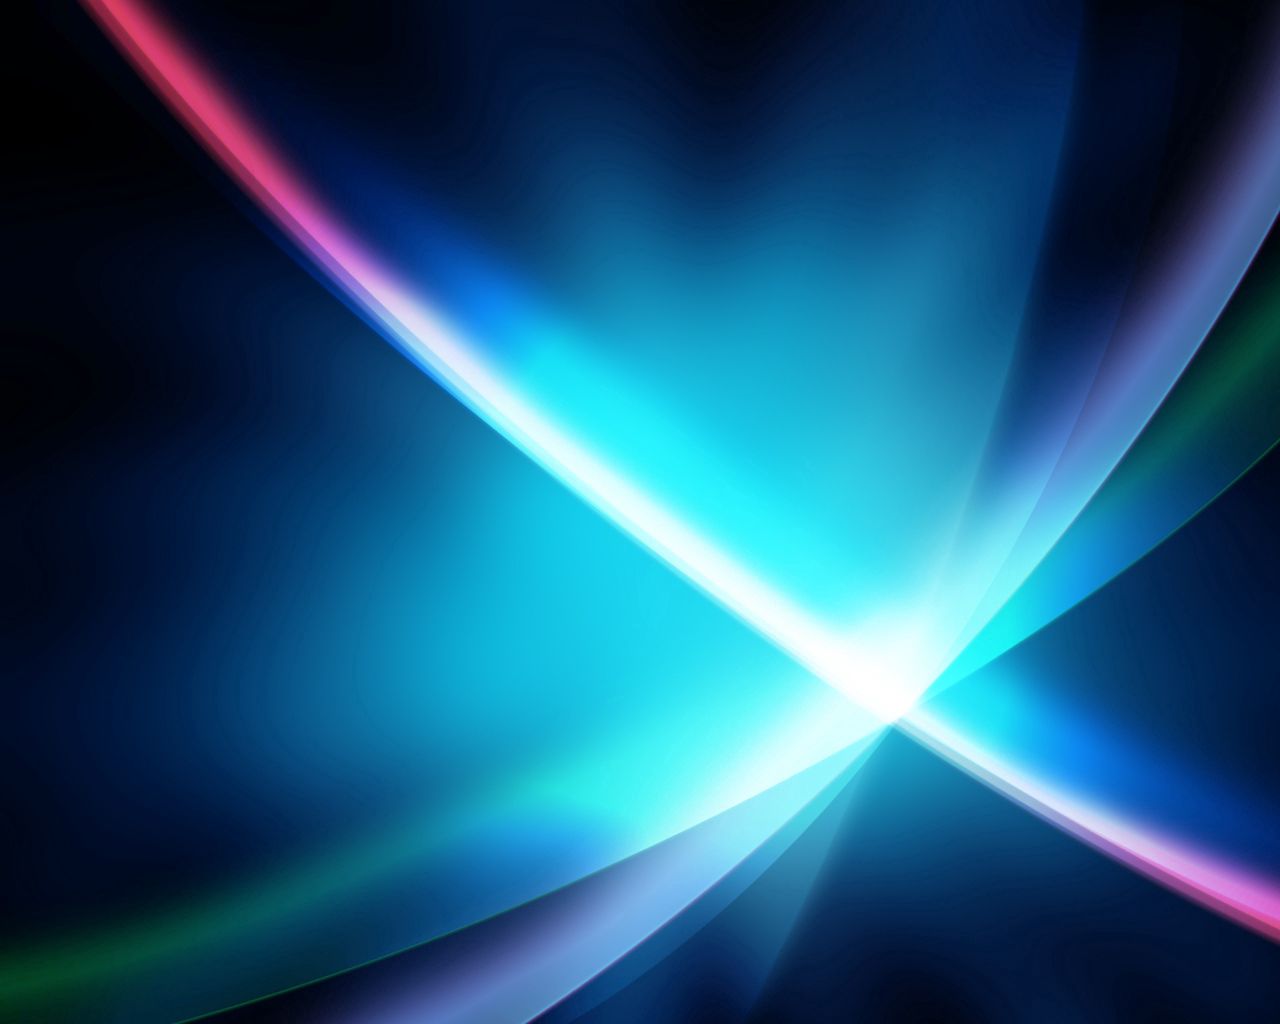 brilliance, light, abstract, blue home screen for smartphone